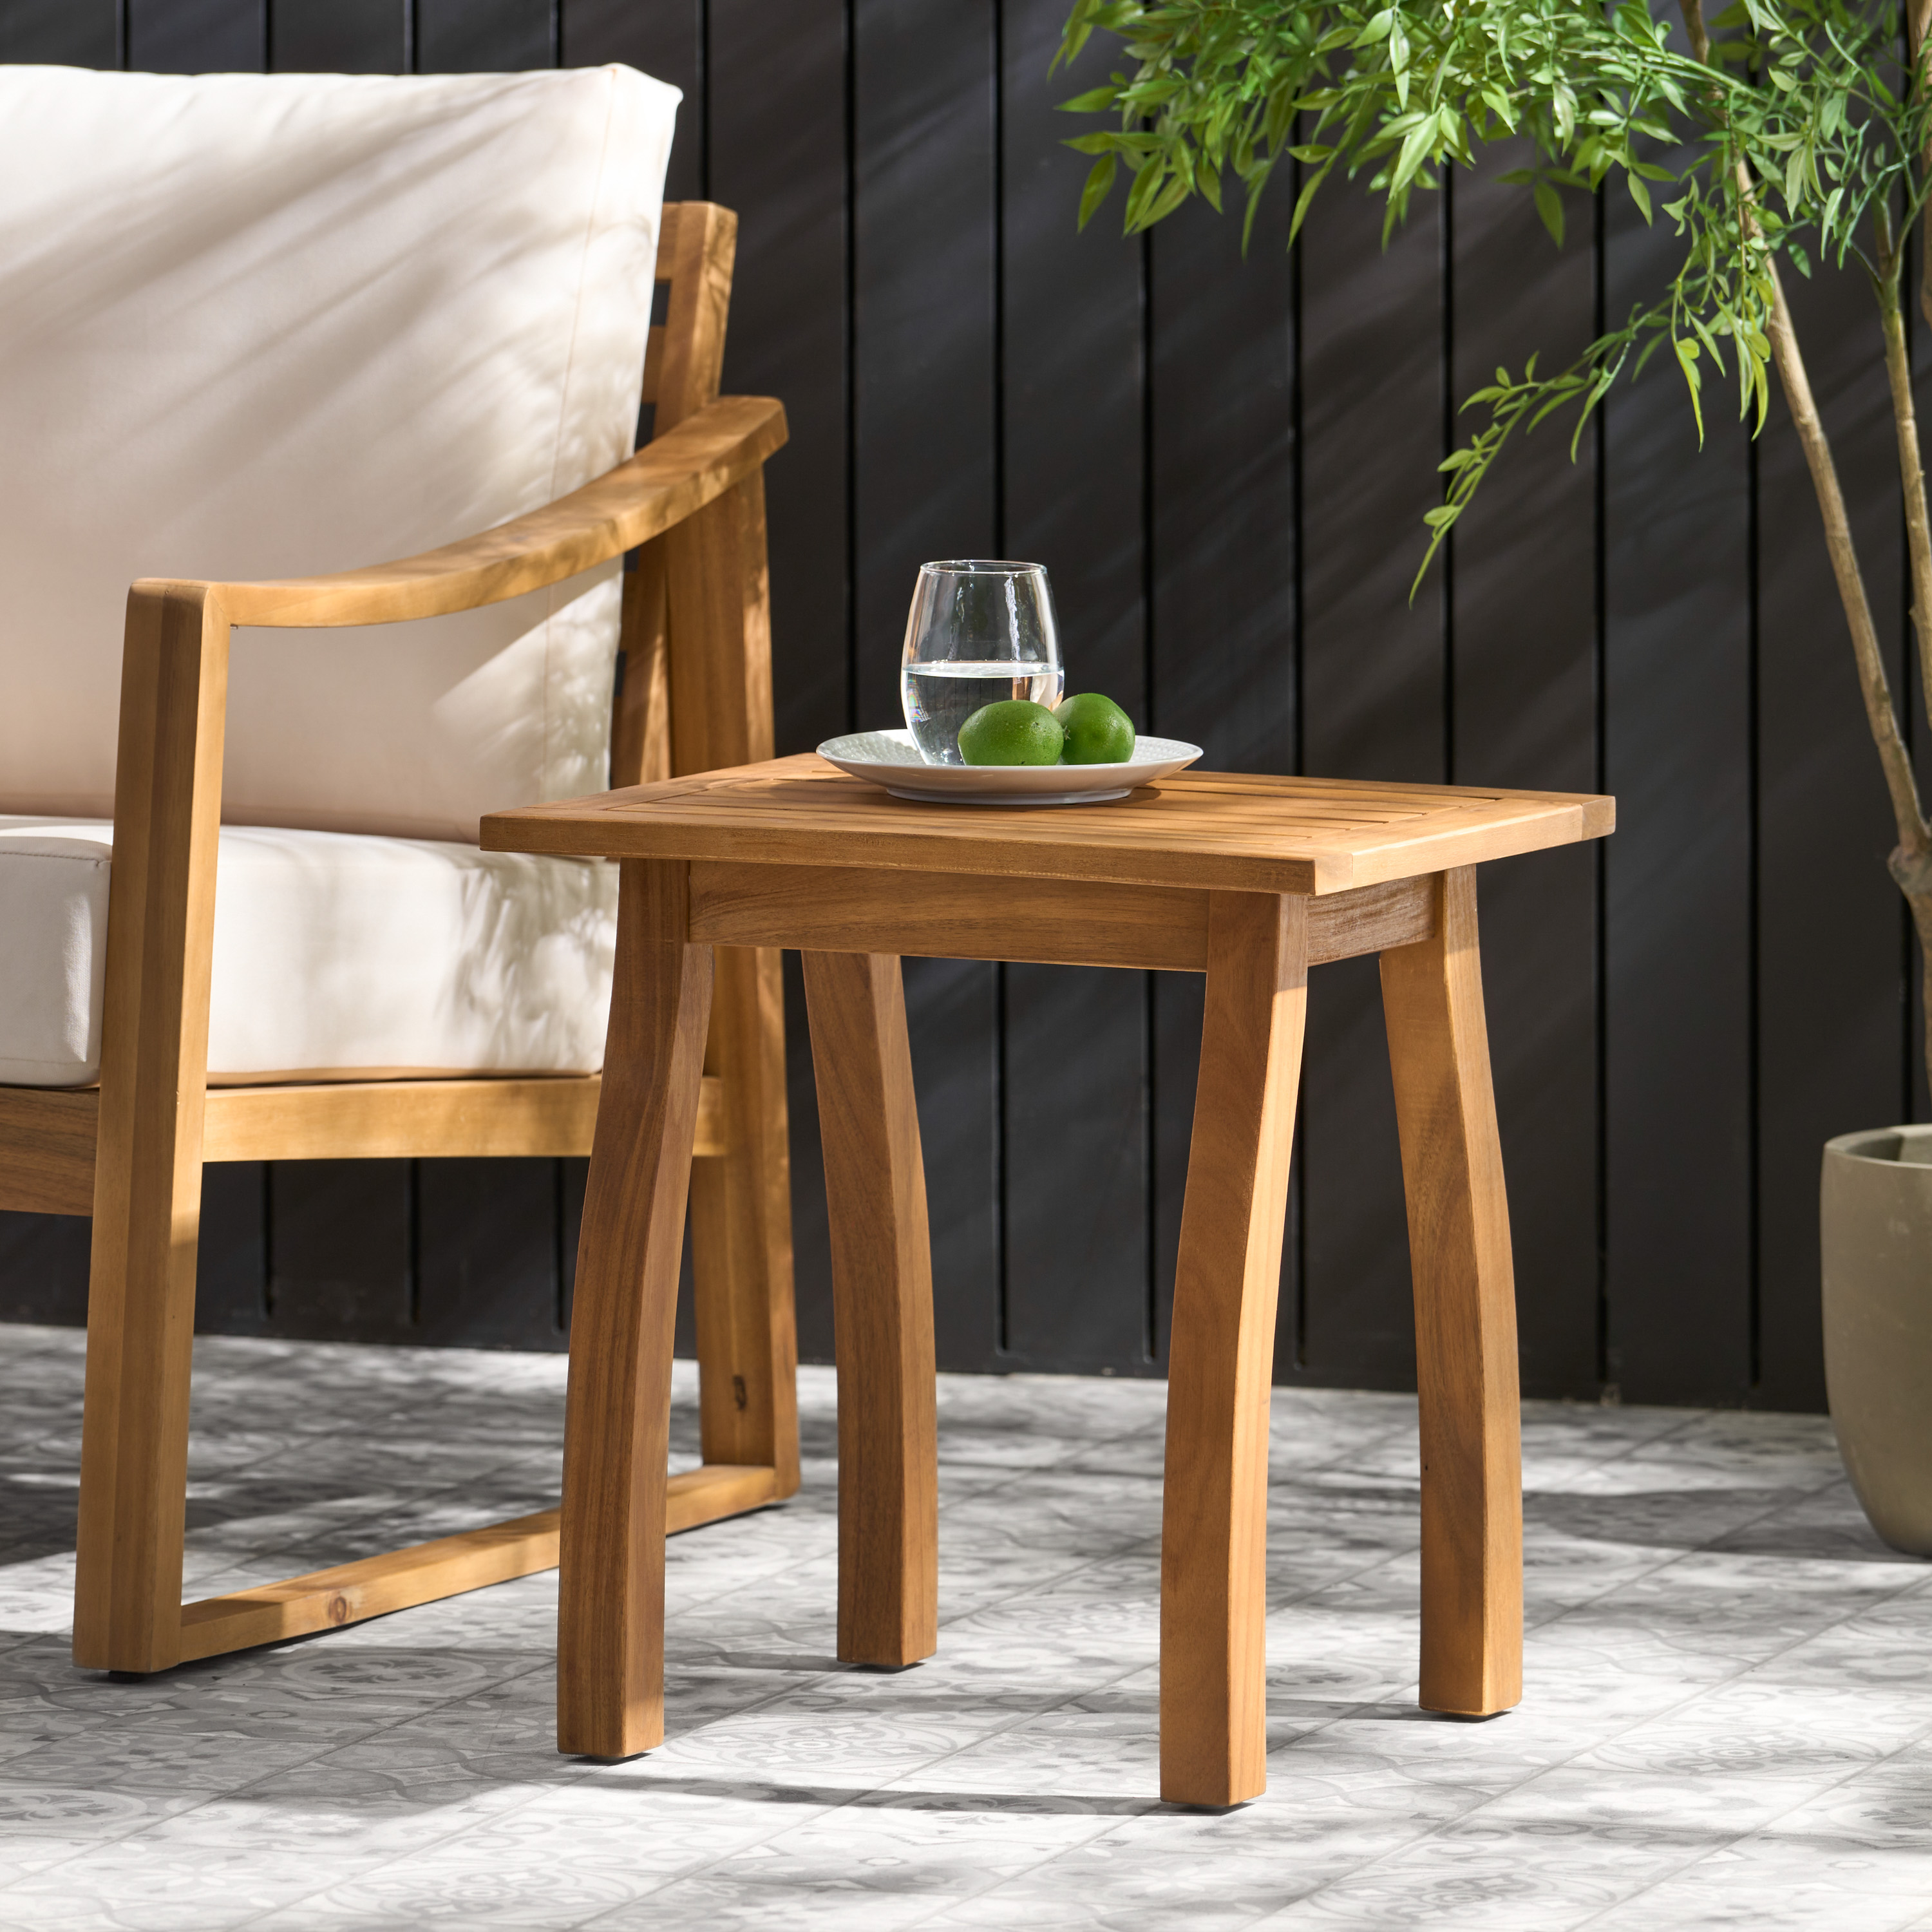 Carlo Outdoor Rectangular Acacia Wood Accent Table, Brown & Teak Finish - image 3 of 10